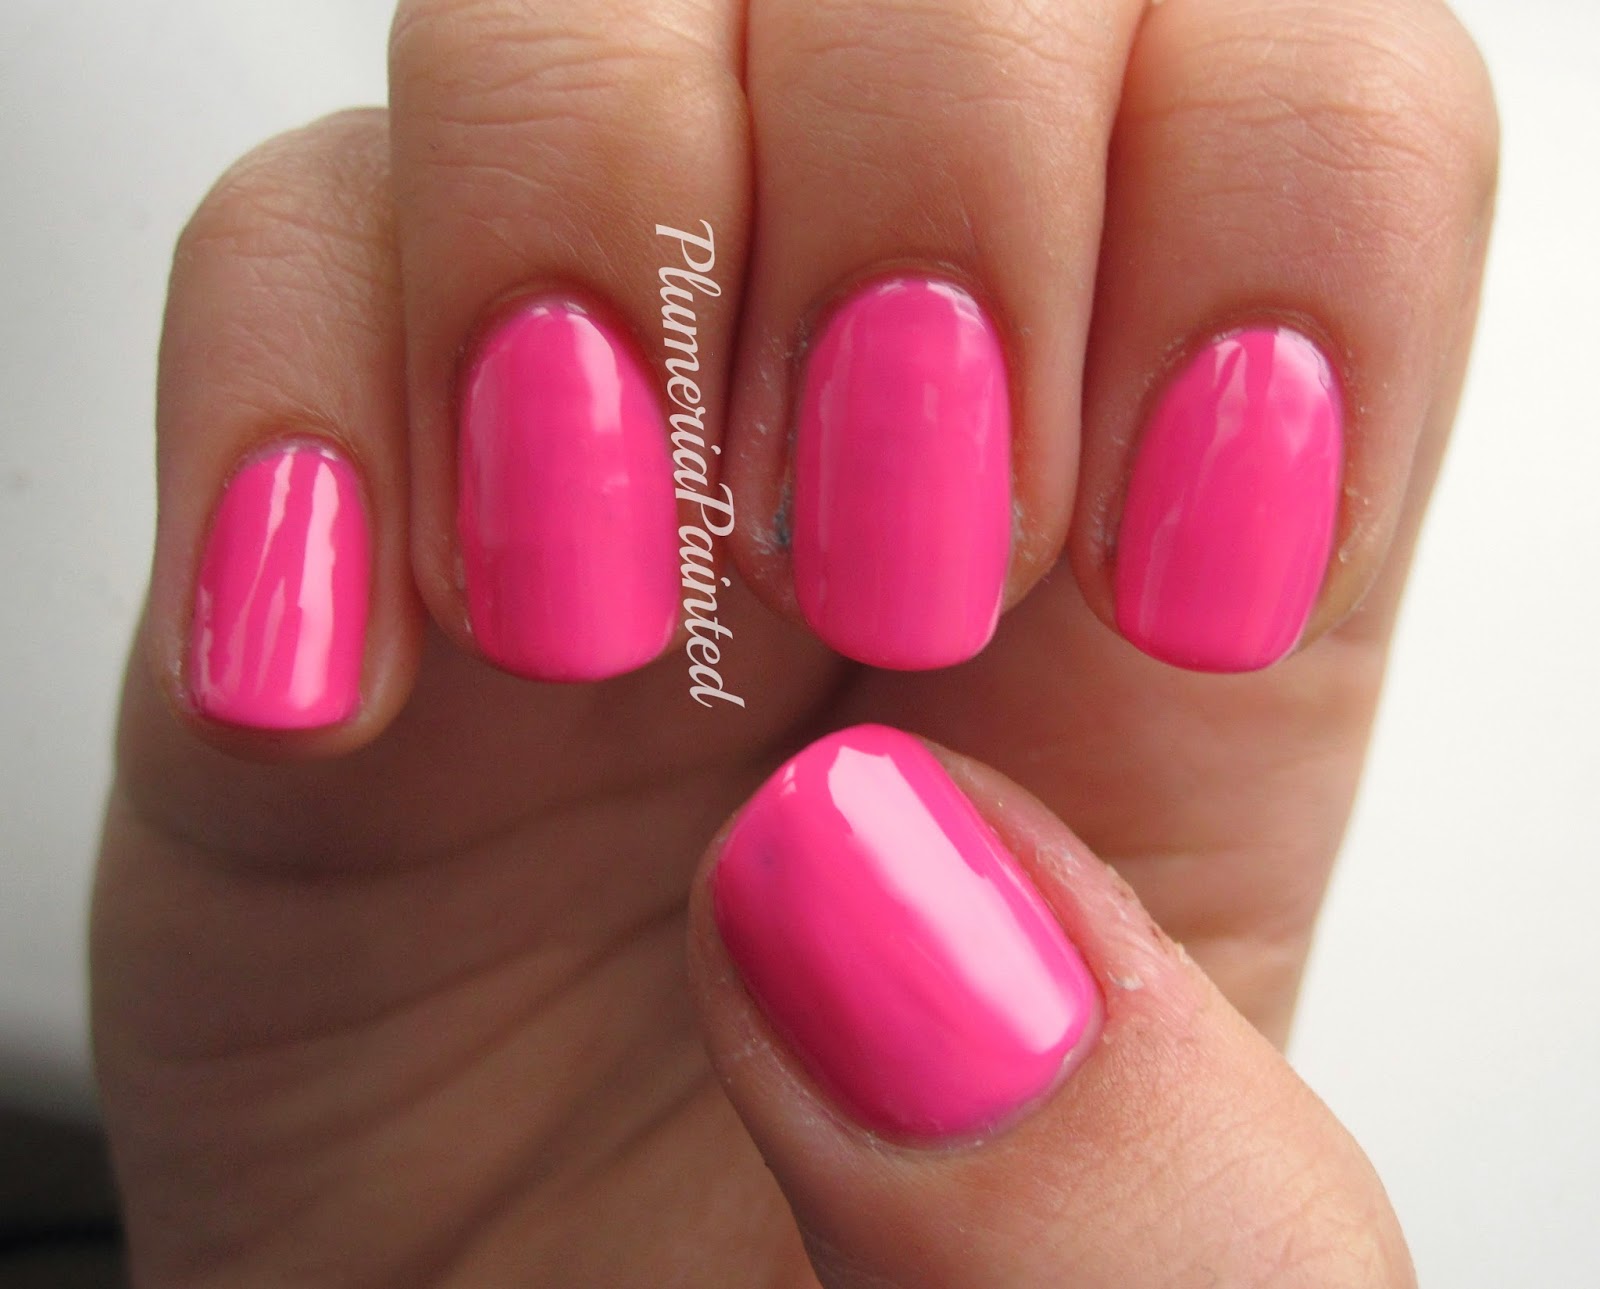 3. The Face Shop Lovely ME:EX Nail Polish in "Pink Champagne" - wide 4